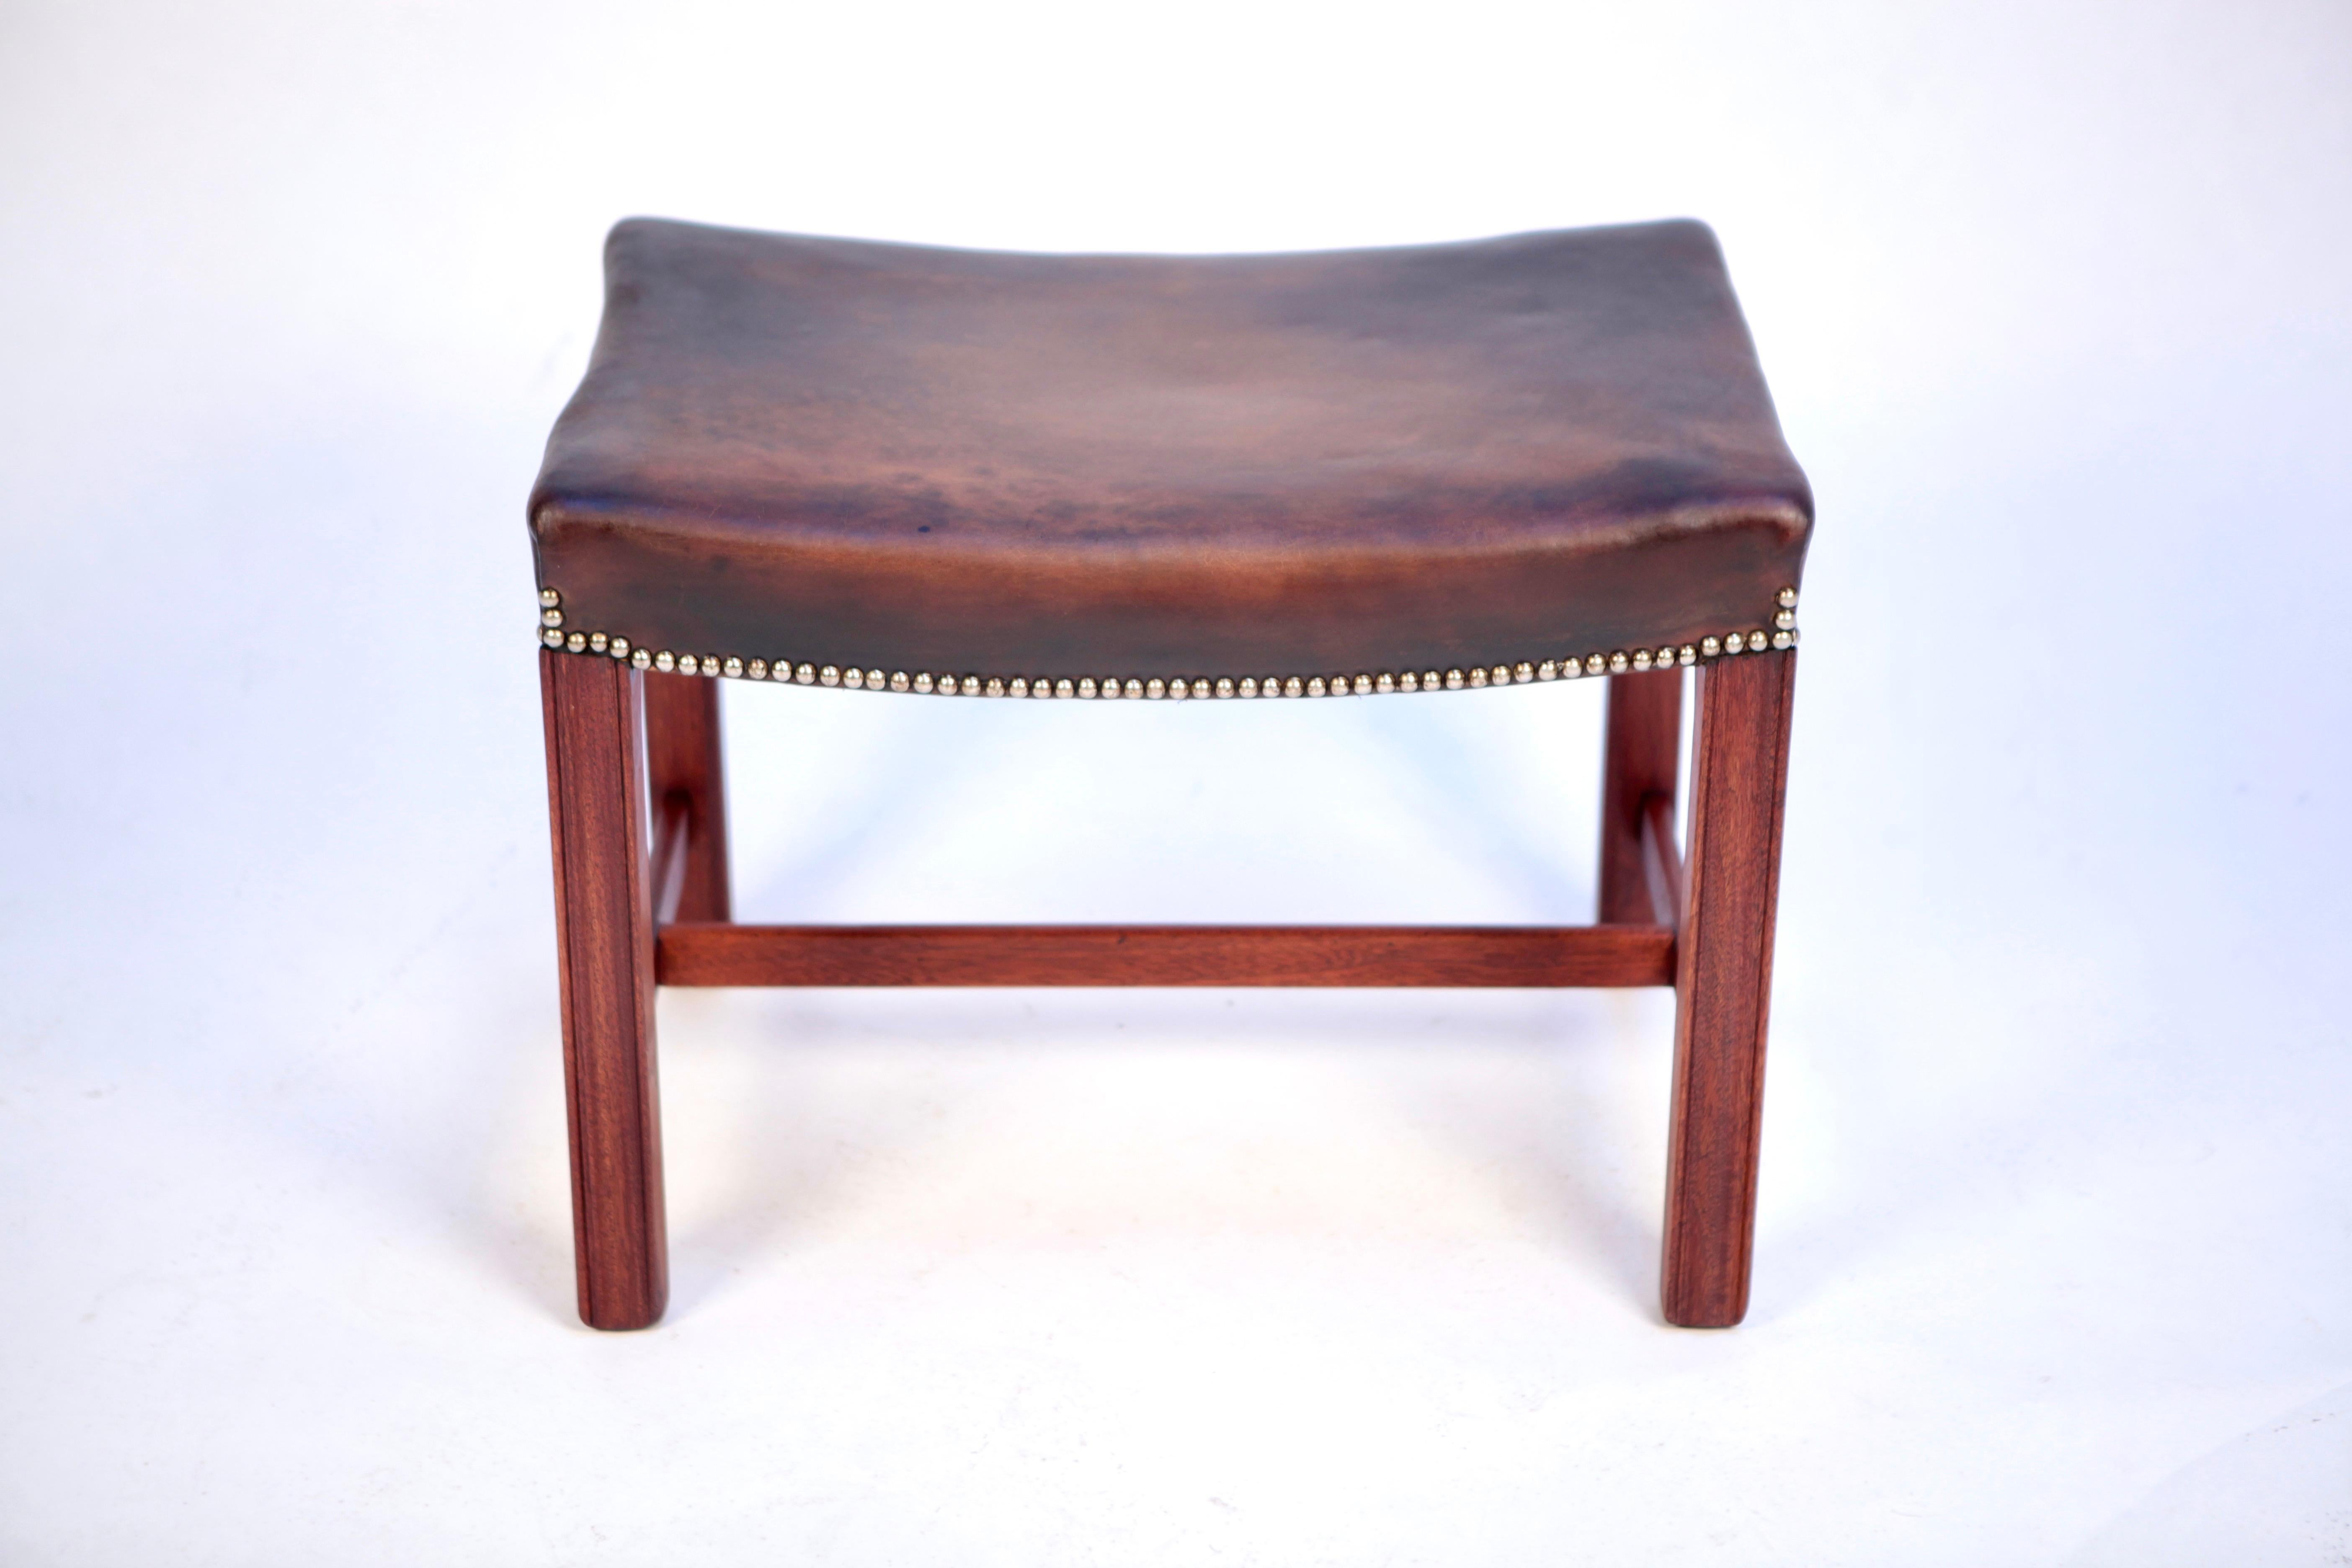 Rare tabouret or bench in Cuban Mahogany, patinated original Niger Leather & brass nails, designed by Kaare Klint and executed by Rud. Rasmussen in Copenhagen in the 1930s.
Matching to the 3758 chair.
Refinished.
Excellent vintage condition.